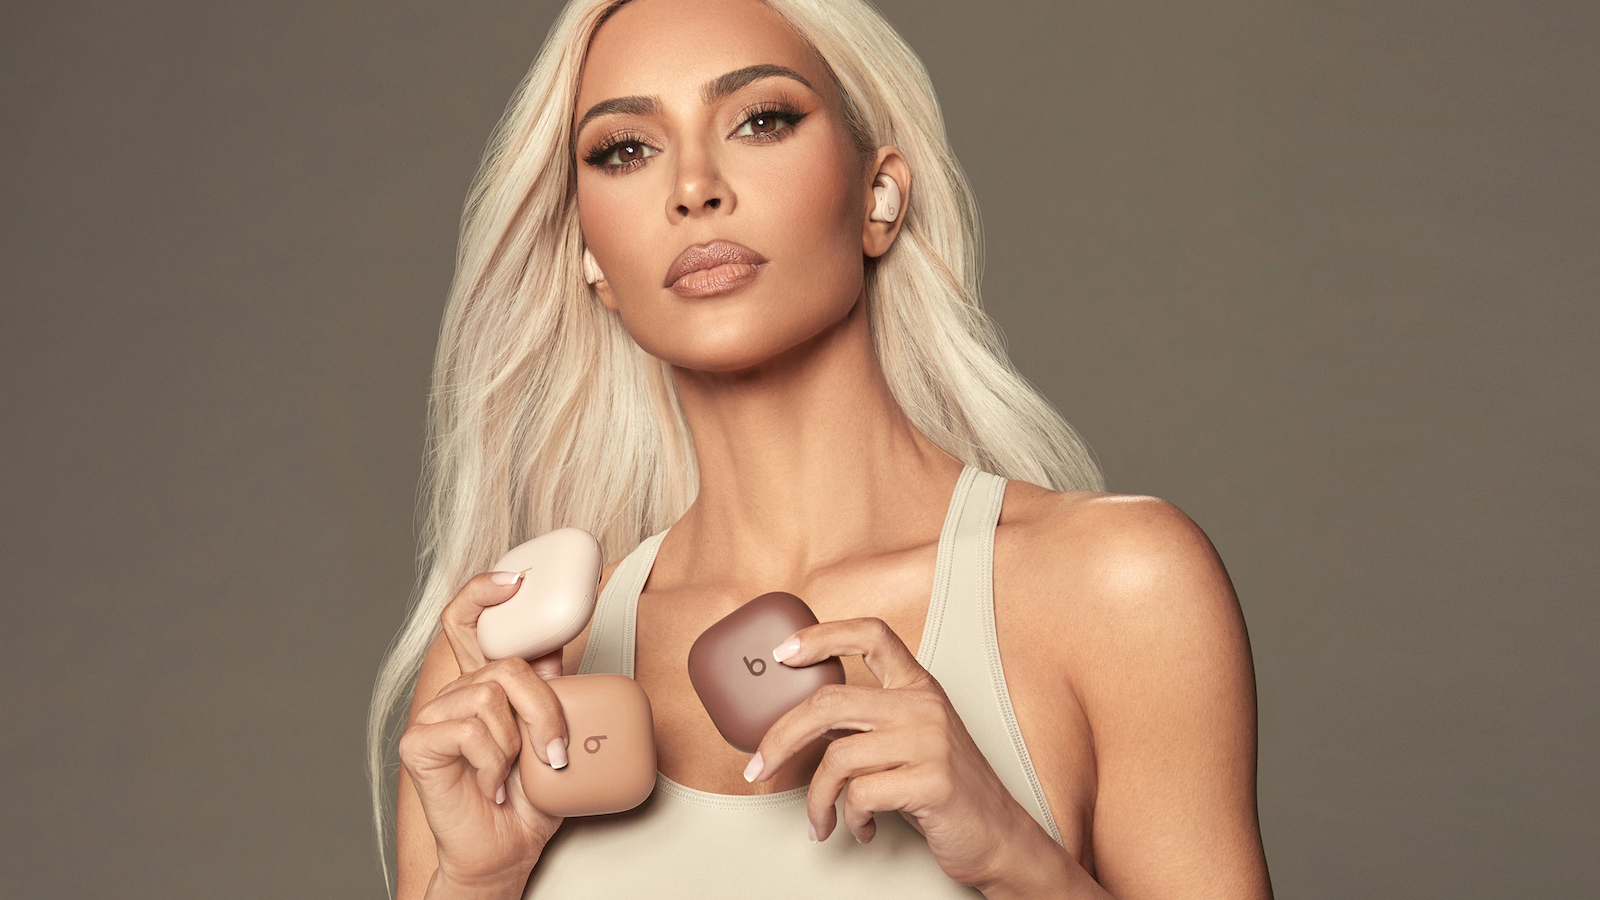 Beats Fit Pro Now Available to Order in Kim Kardashian’s New Colors